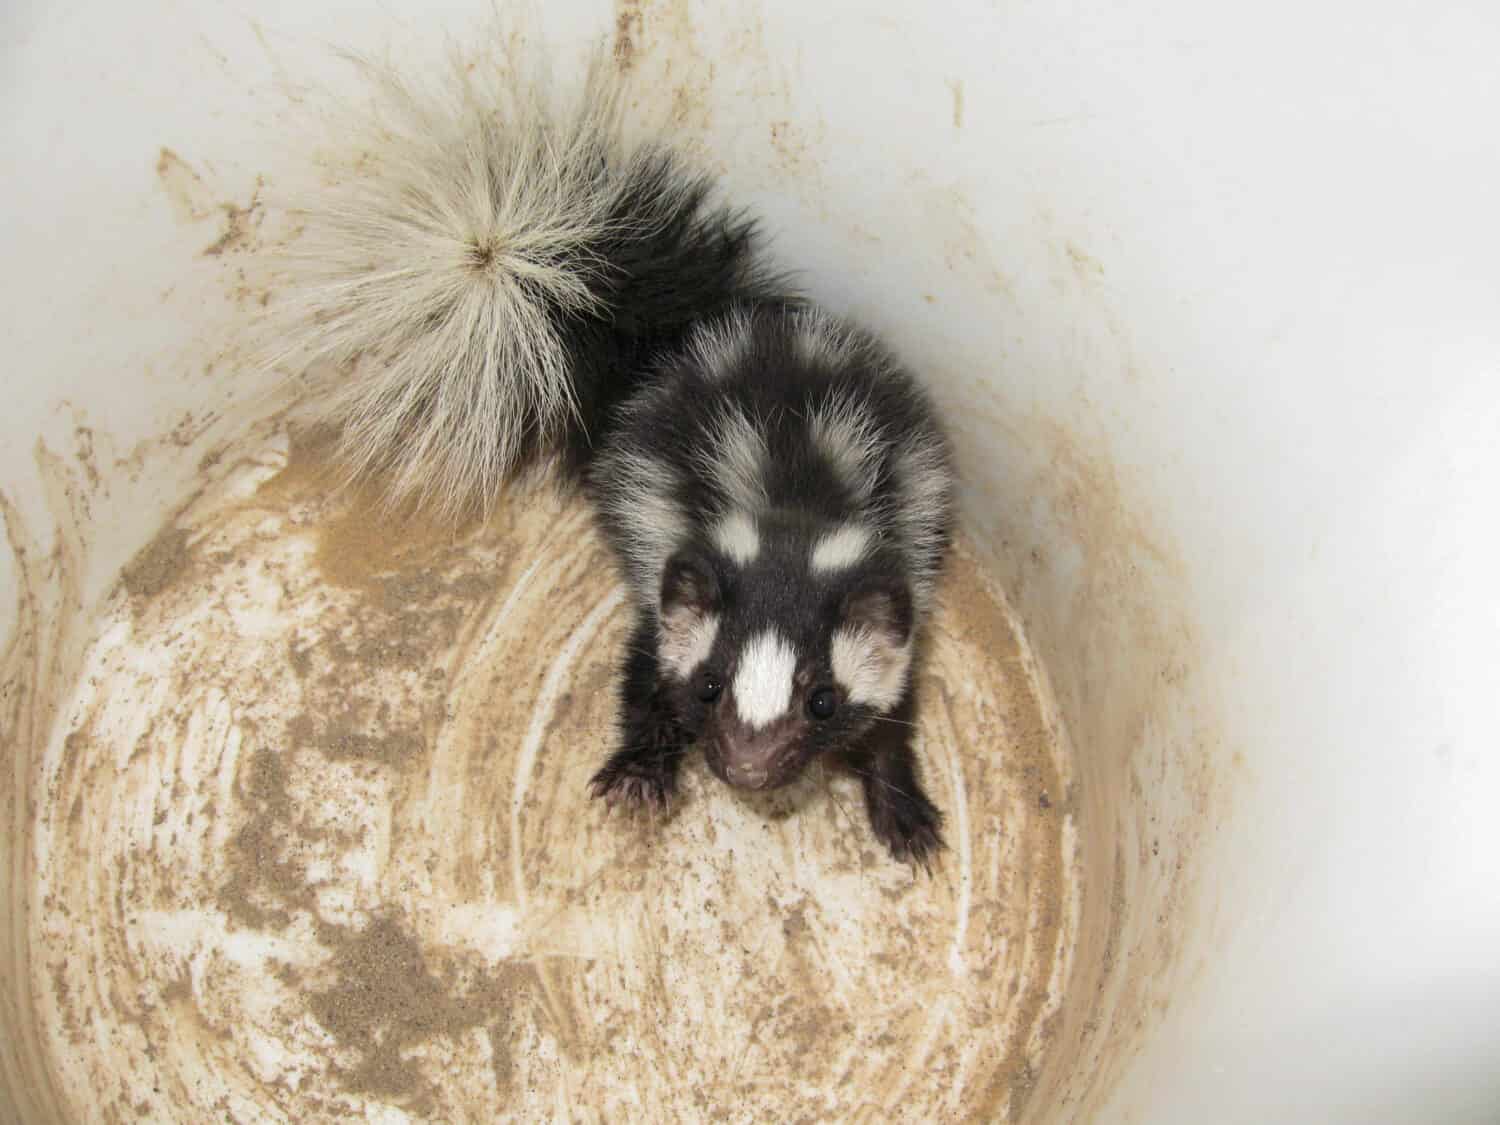 A baby Western Spotted Skunk inside a white five gallon bucket.